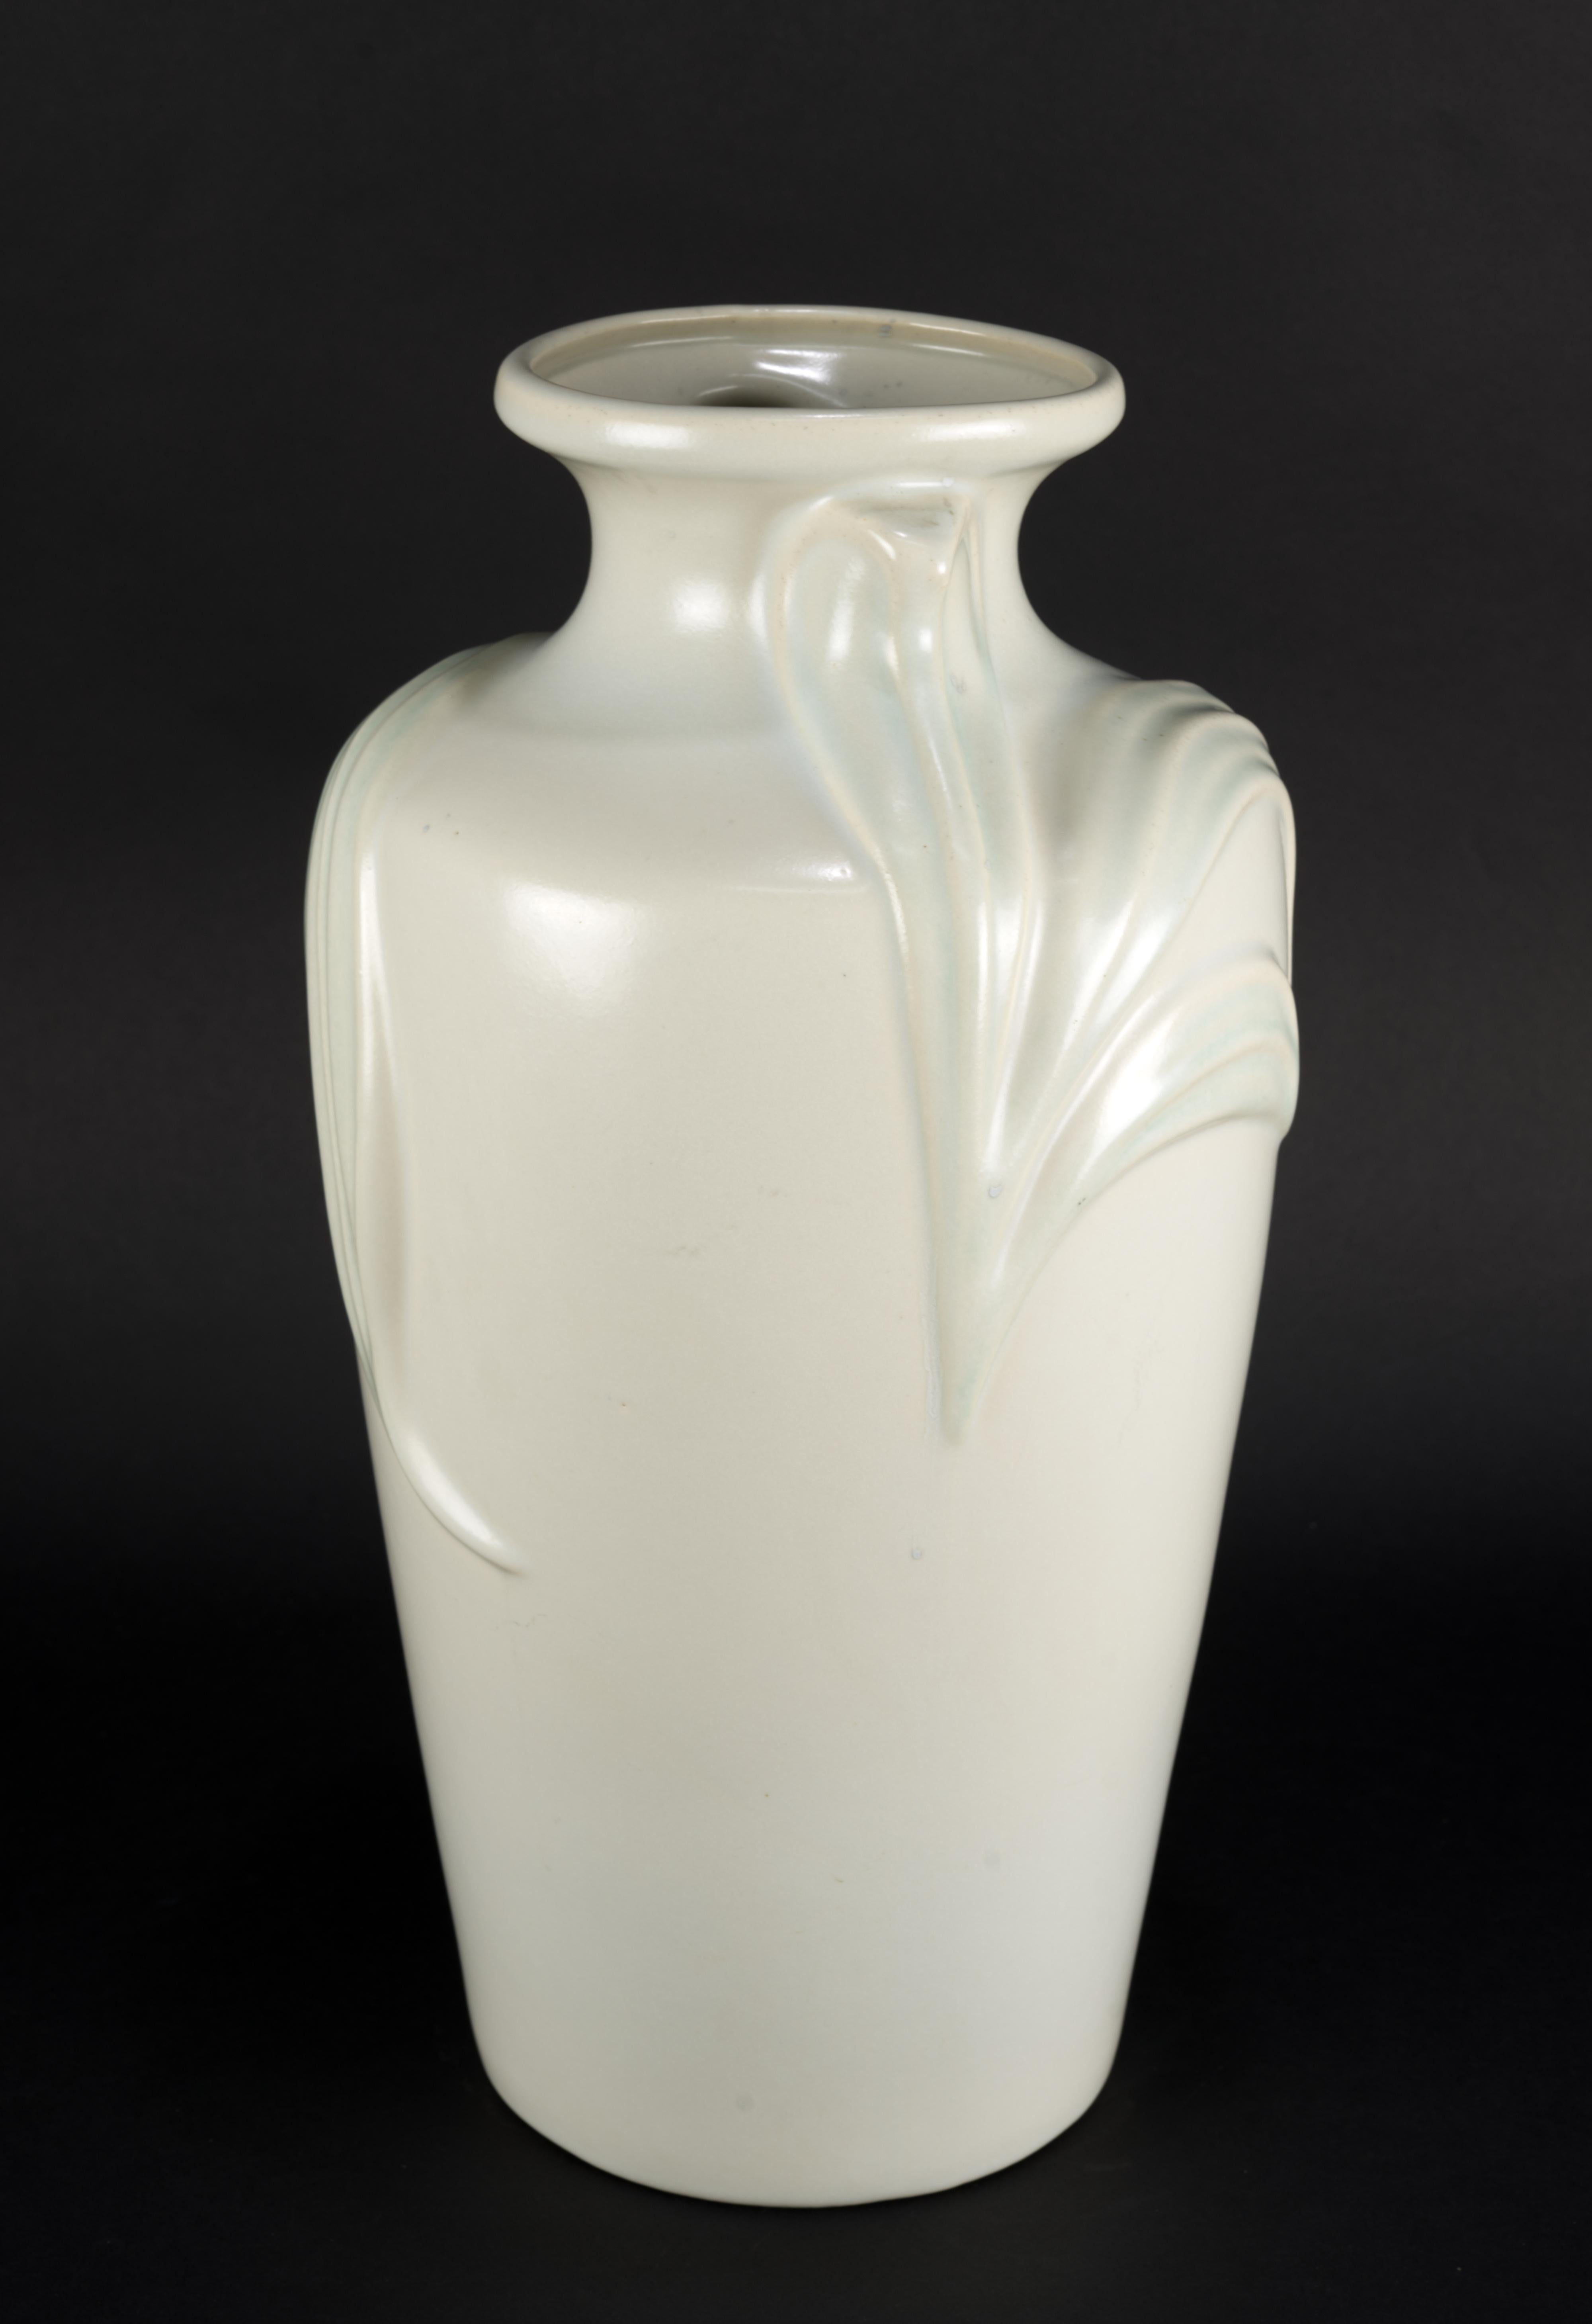 Art Deco Revival Large Light Blue Off-White Vase, Relief of Leaves, 1980s For Sale 1